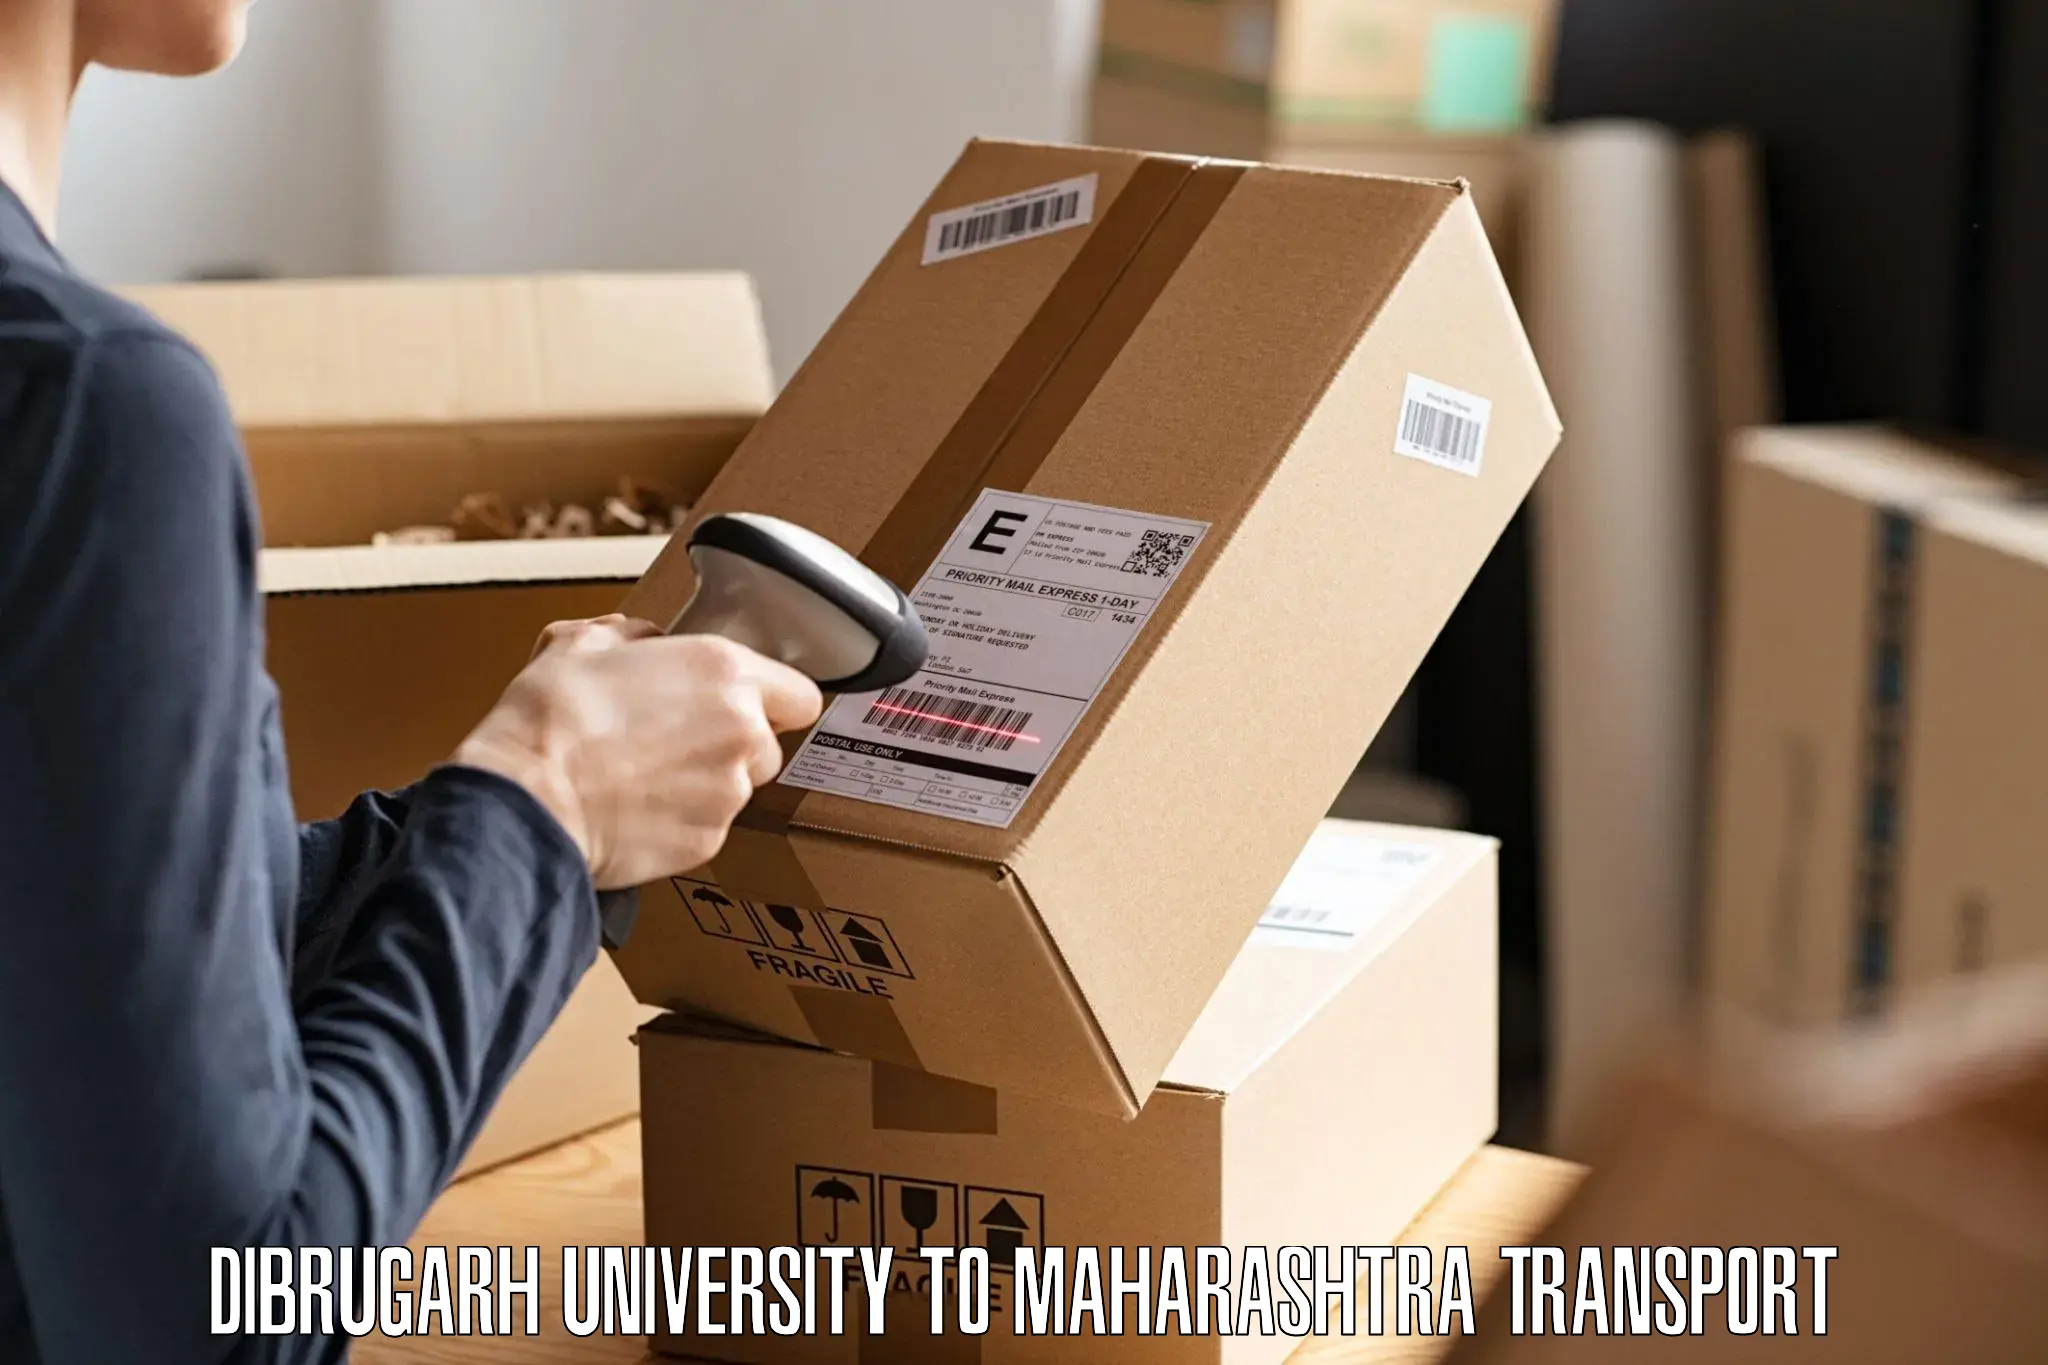 Goods delivery service Dibrugarh University to Lonere